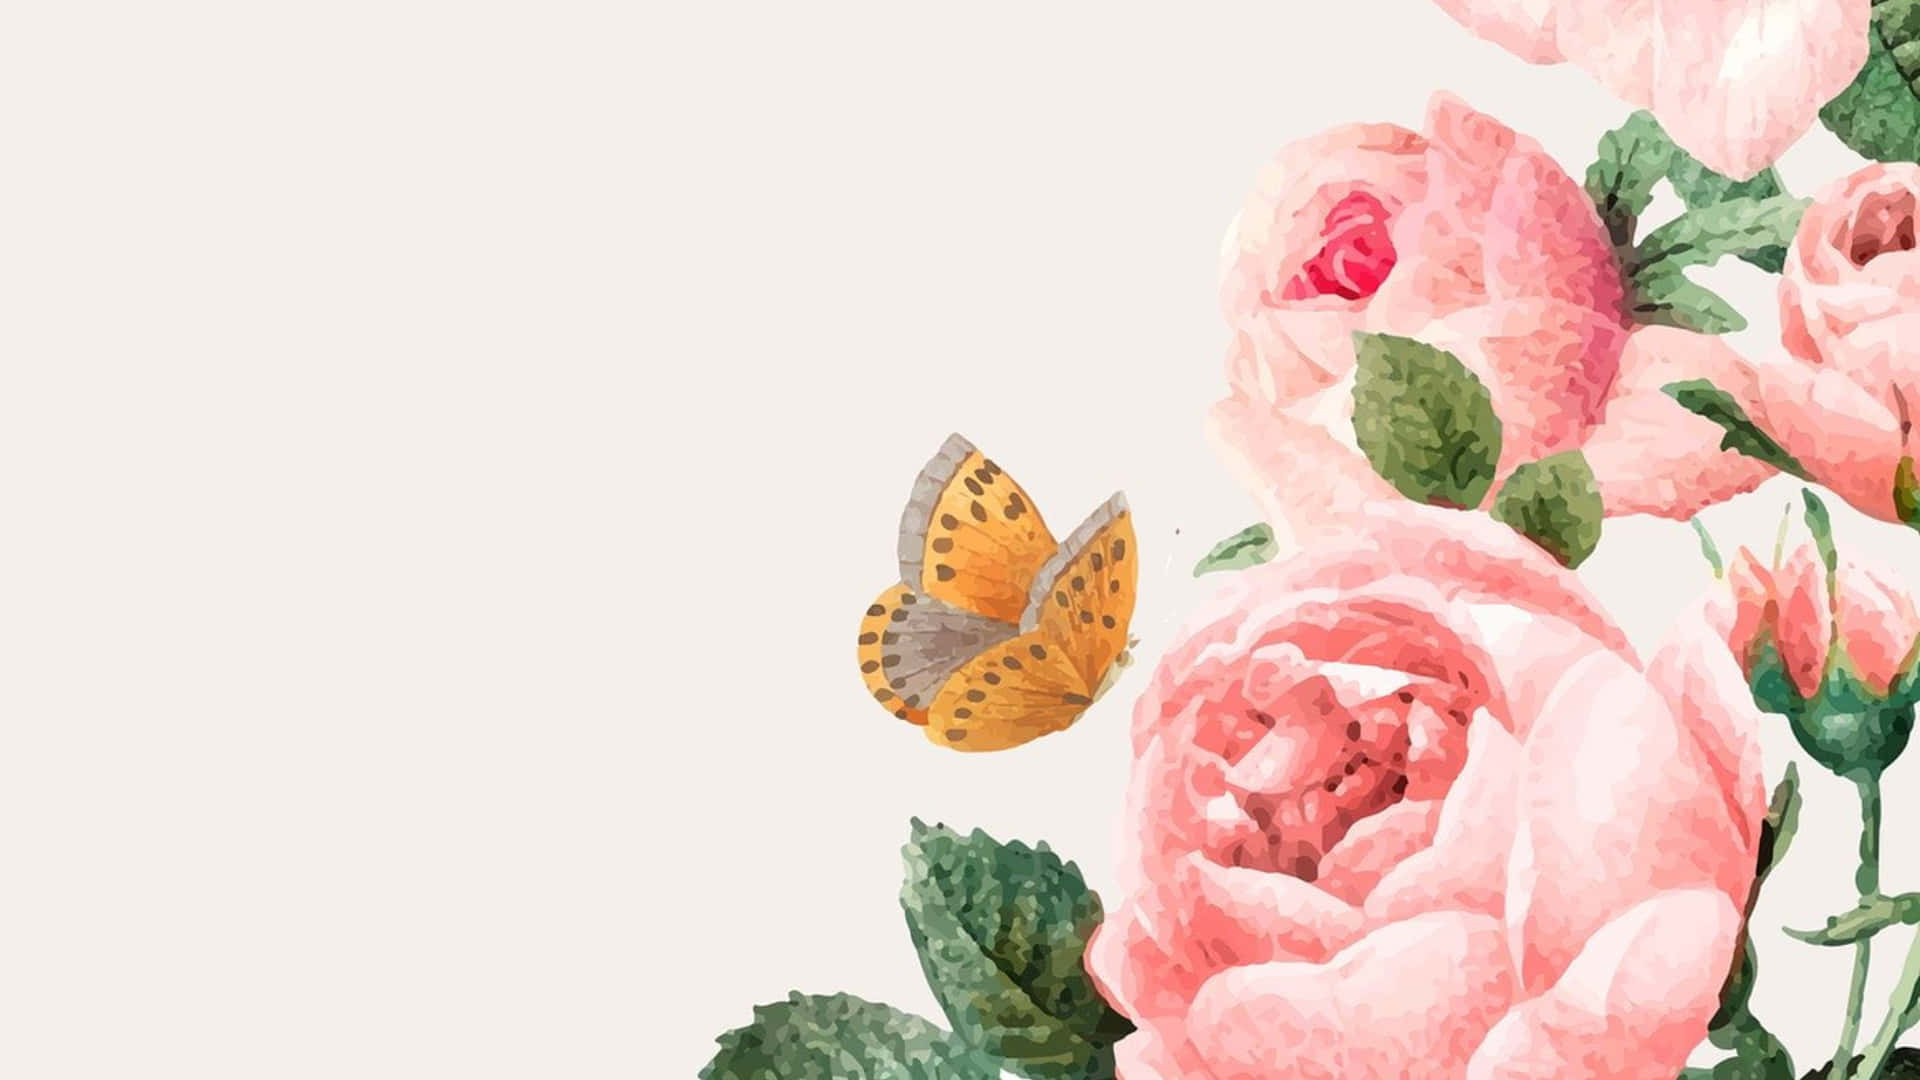 Butterflyand Roses Watercolor Illustration Background